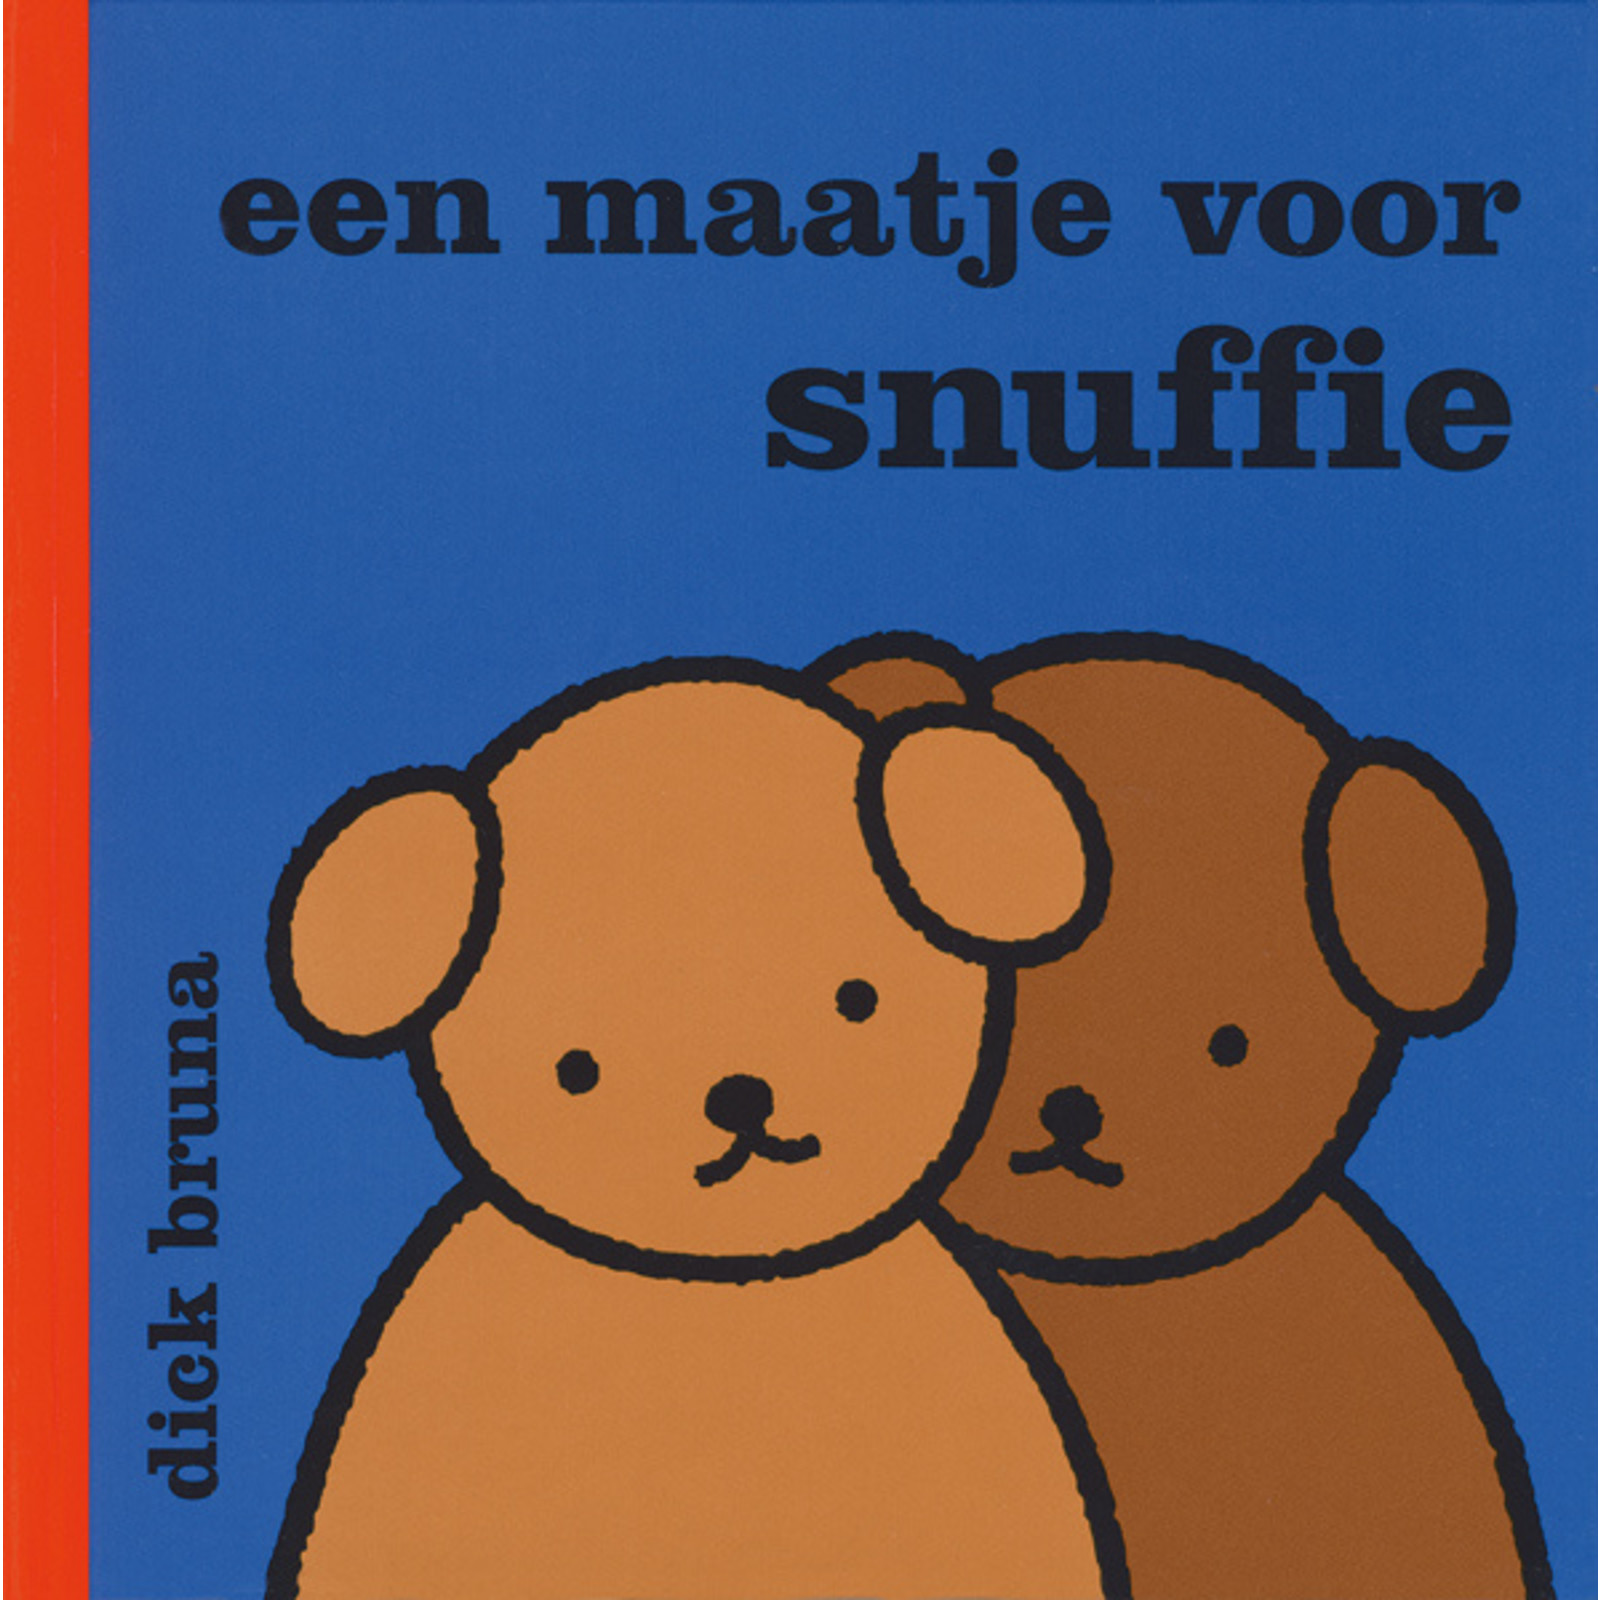 een maatje voor snuffie (a buddy for snuffy)